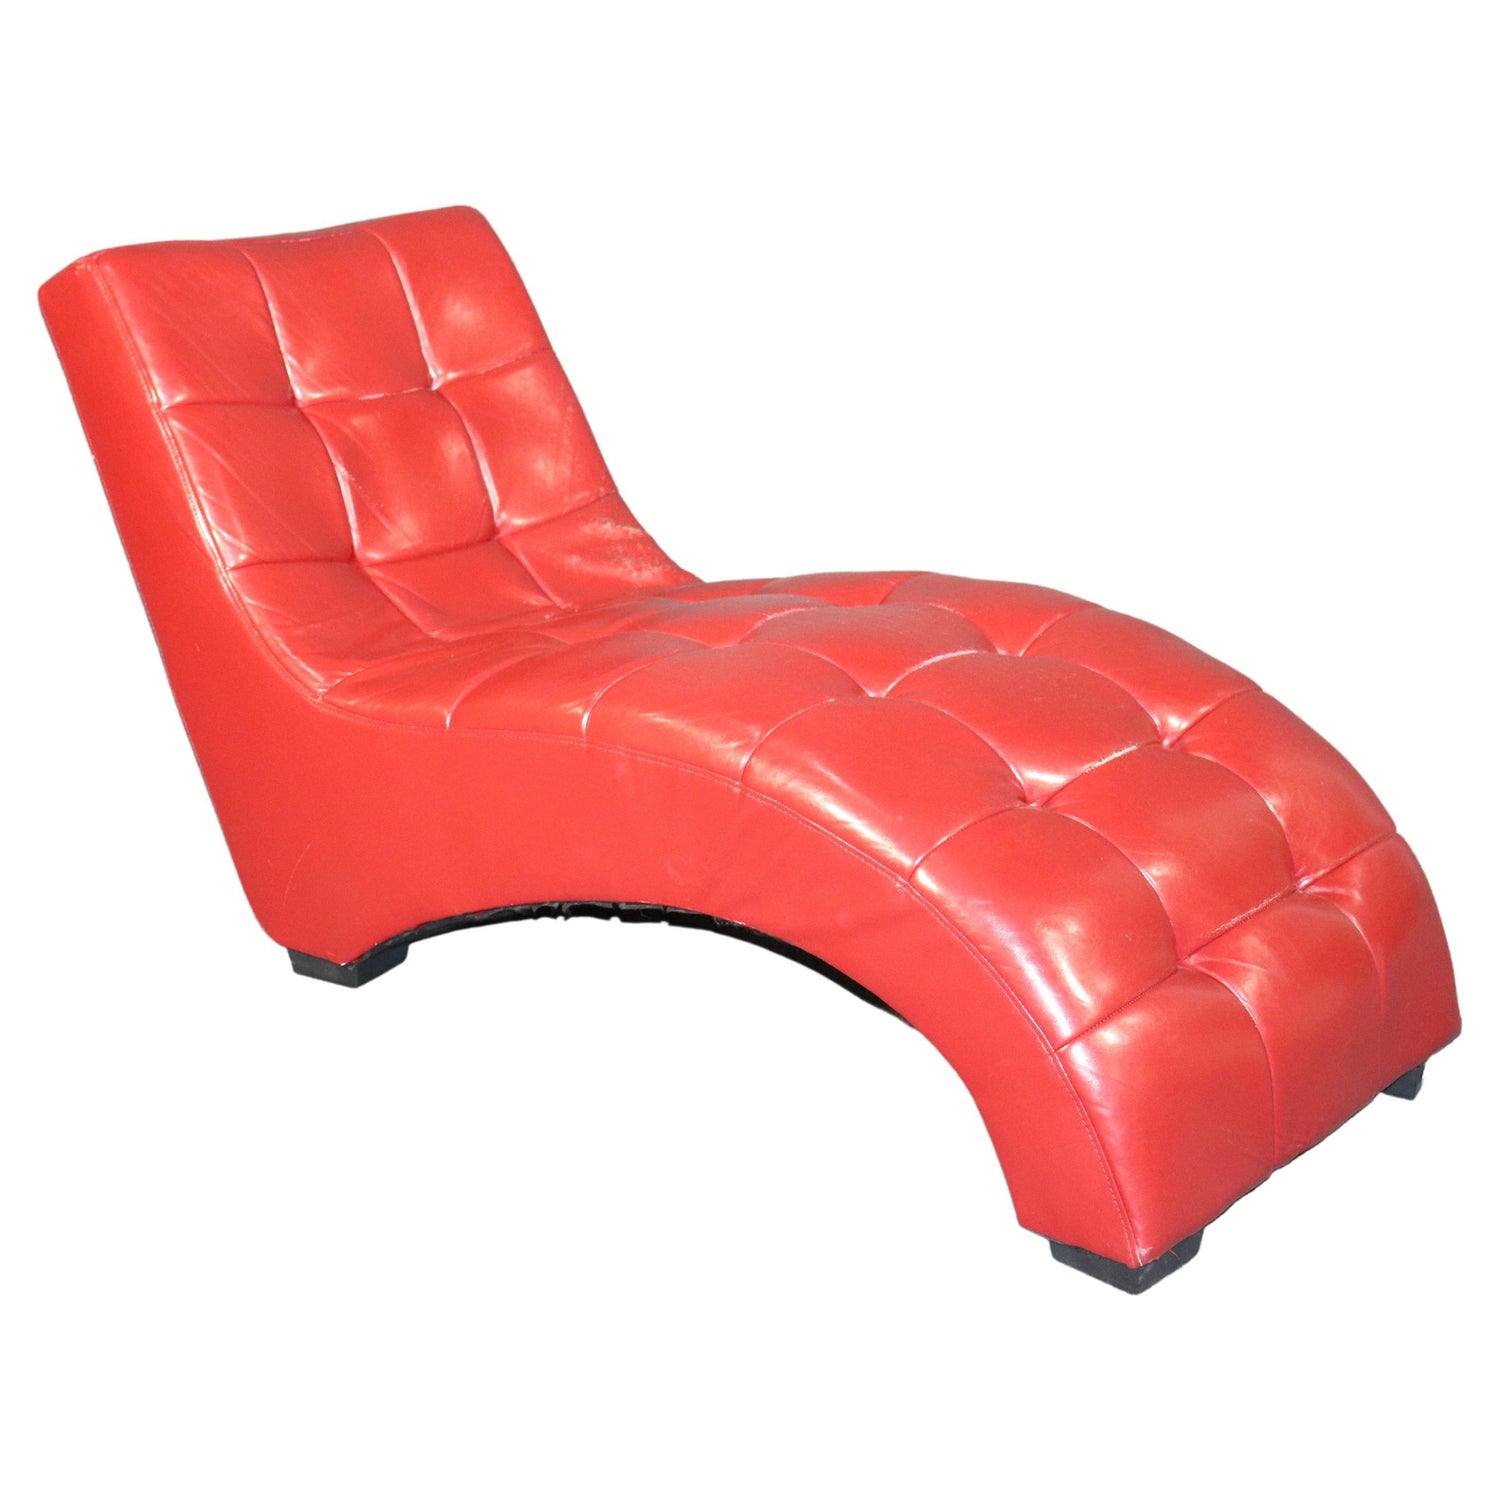 Rich Mnisi, Alkebulan I, Leather Chaise For Sale at 1stDibs